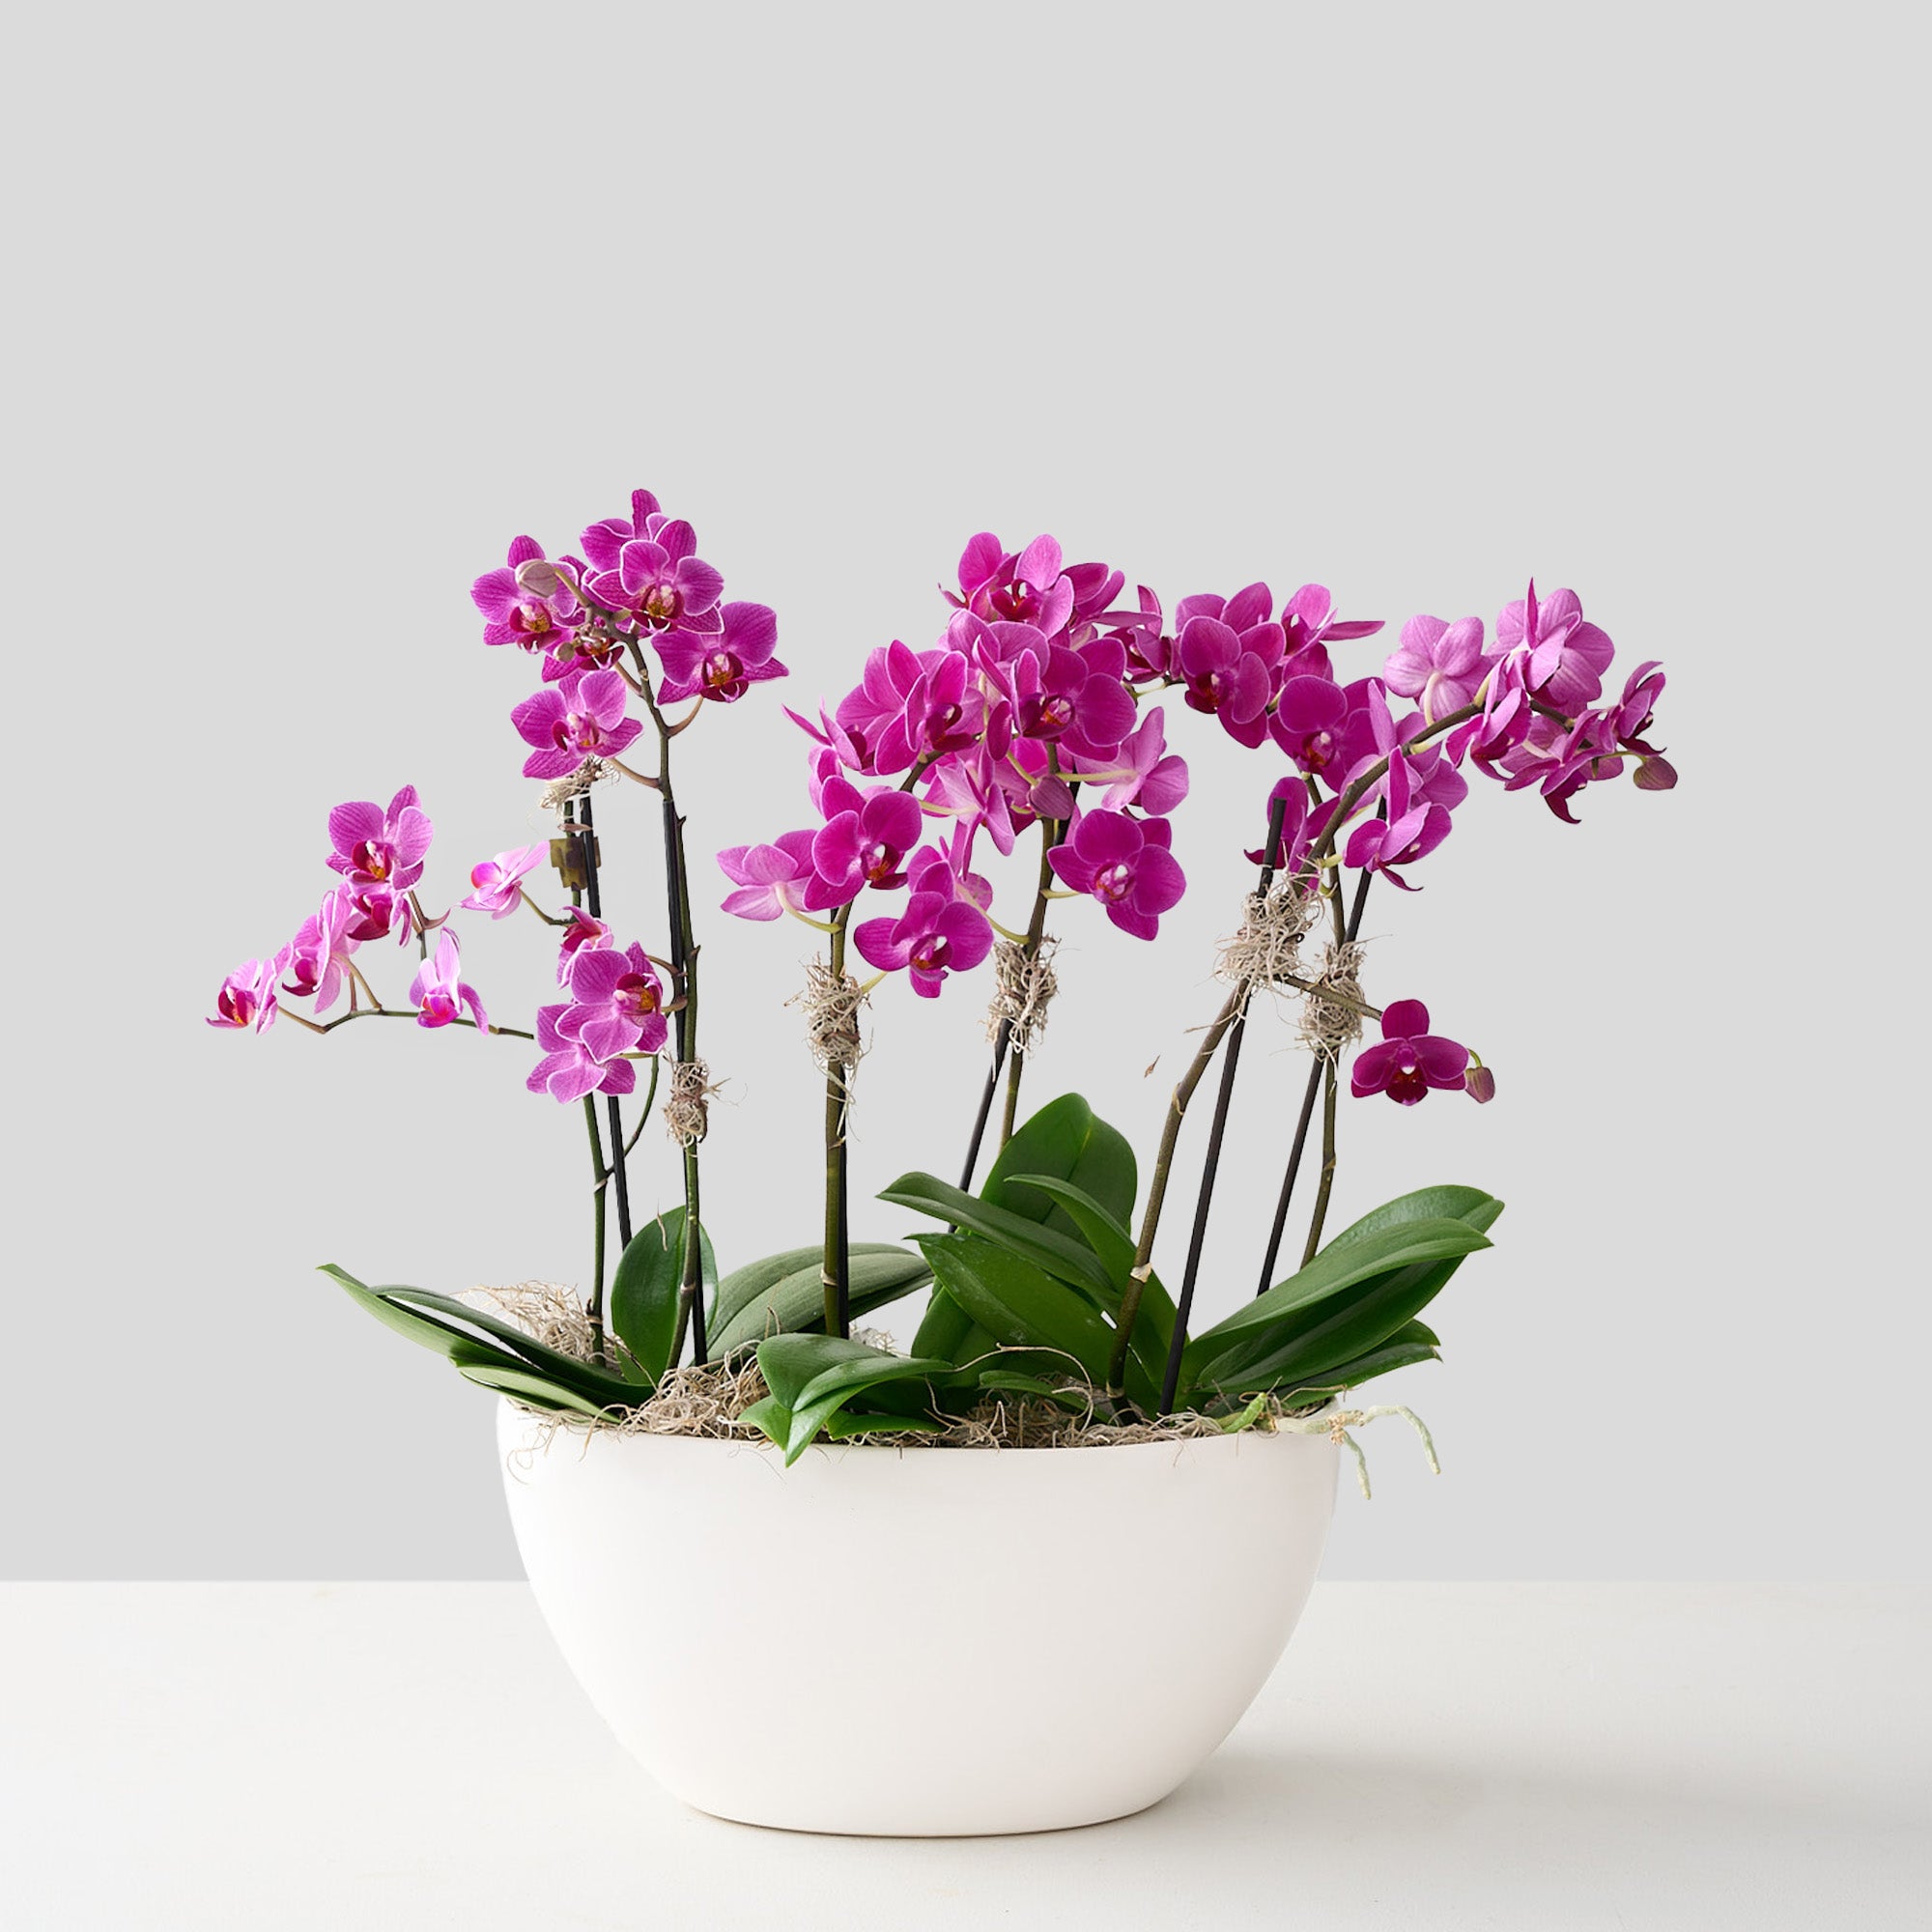 Full view of mini pink orchids in white ceramic